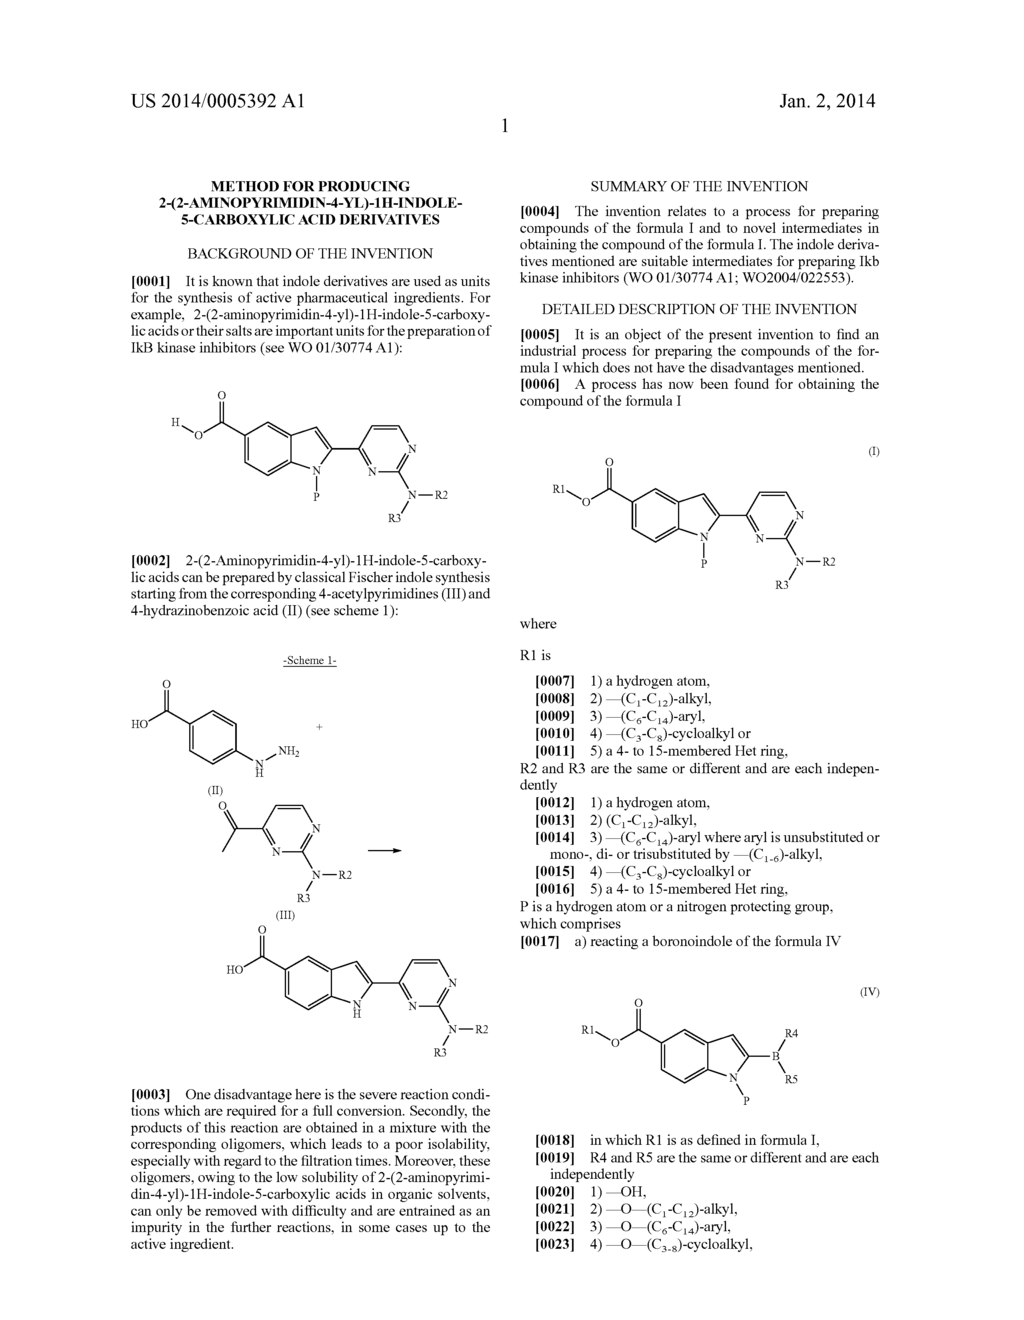 METHOD FOR PRODUCING 2-(2-AMINOPYRIMIDIN-4-YL)-1H-INDOLE-5-CARBOXYLIC ACID     DERIVATIVES - diagram, schematic, and image 02